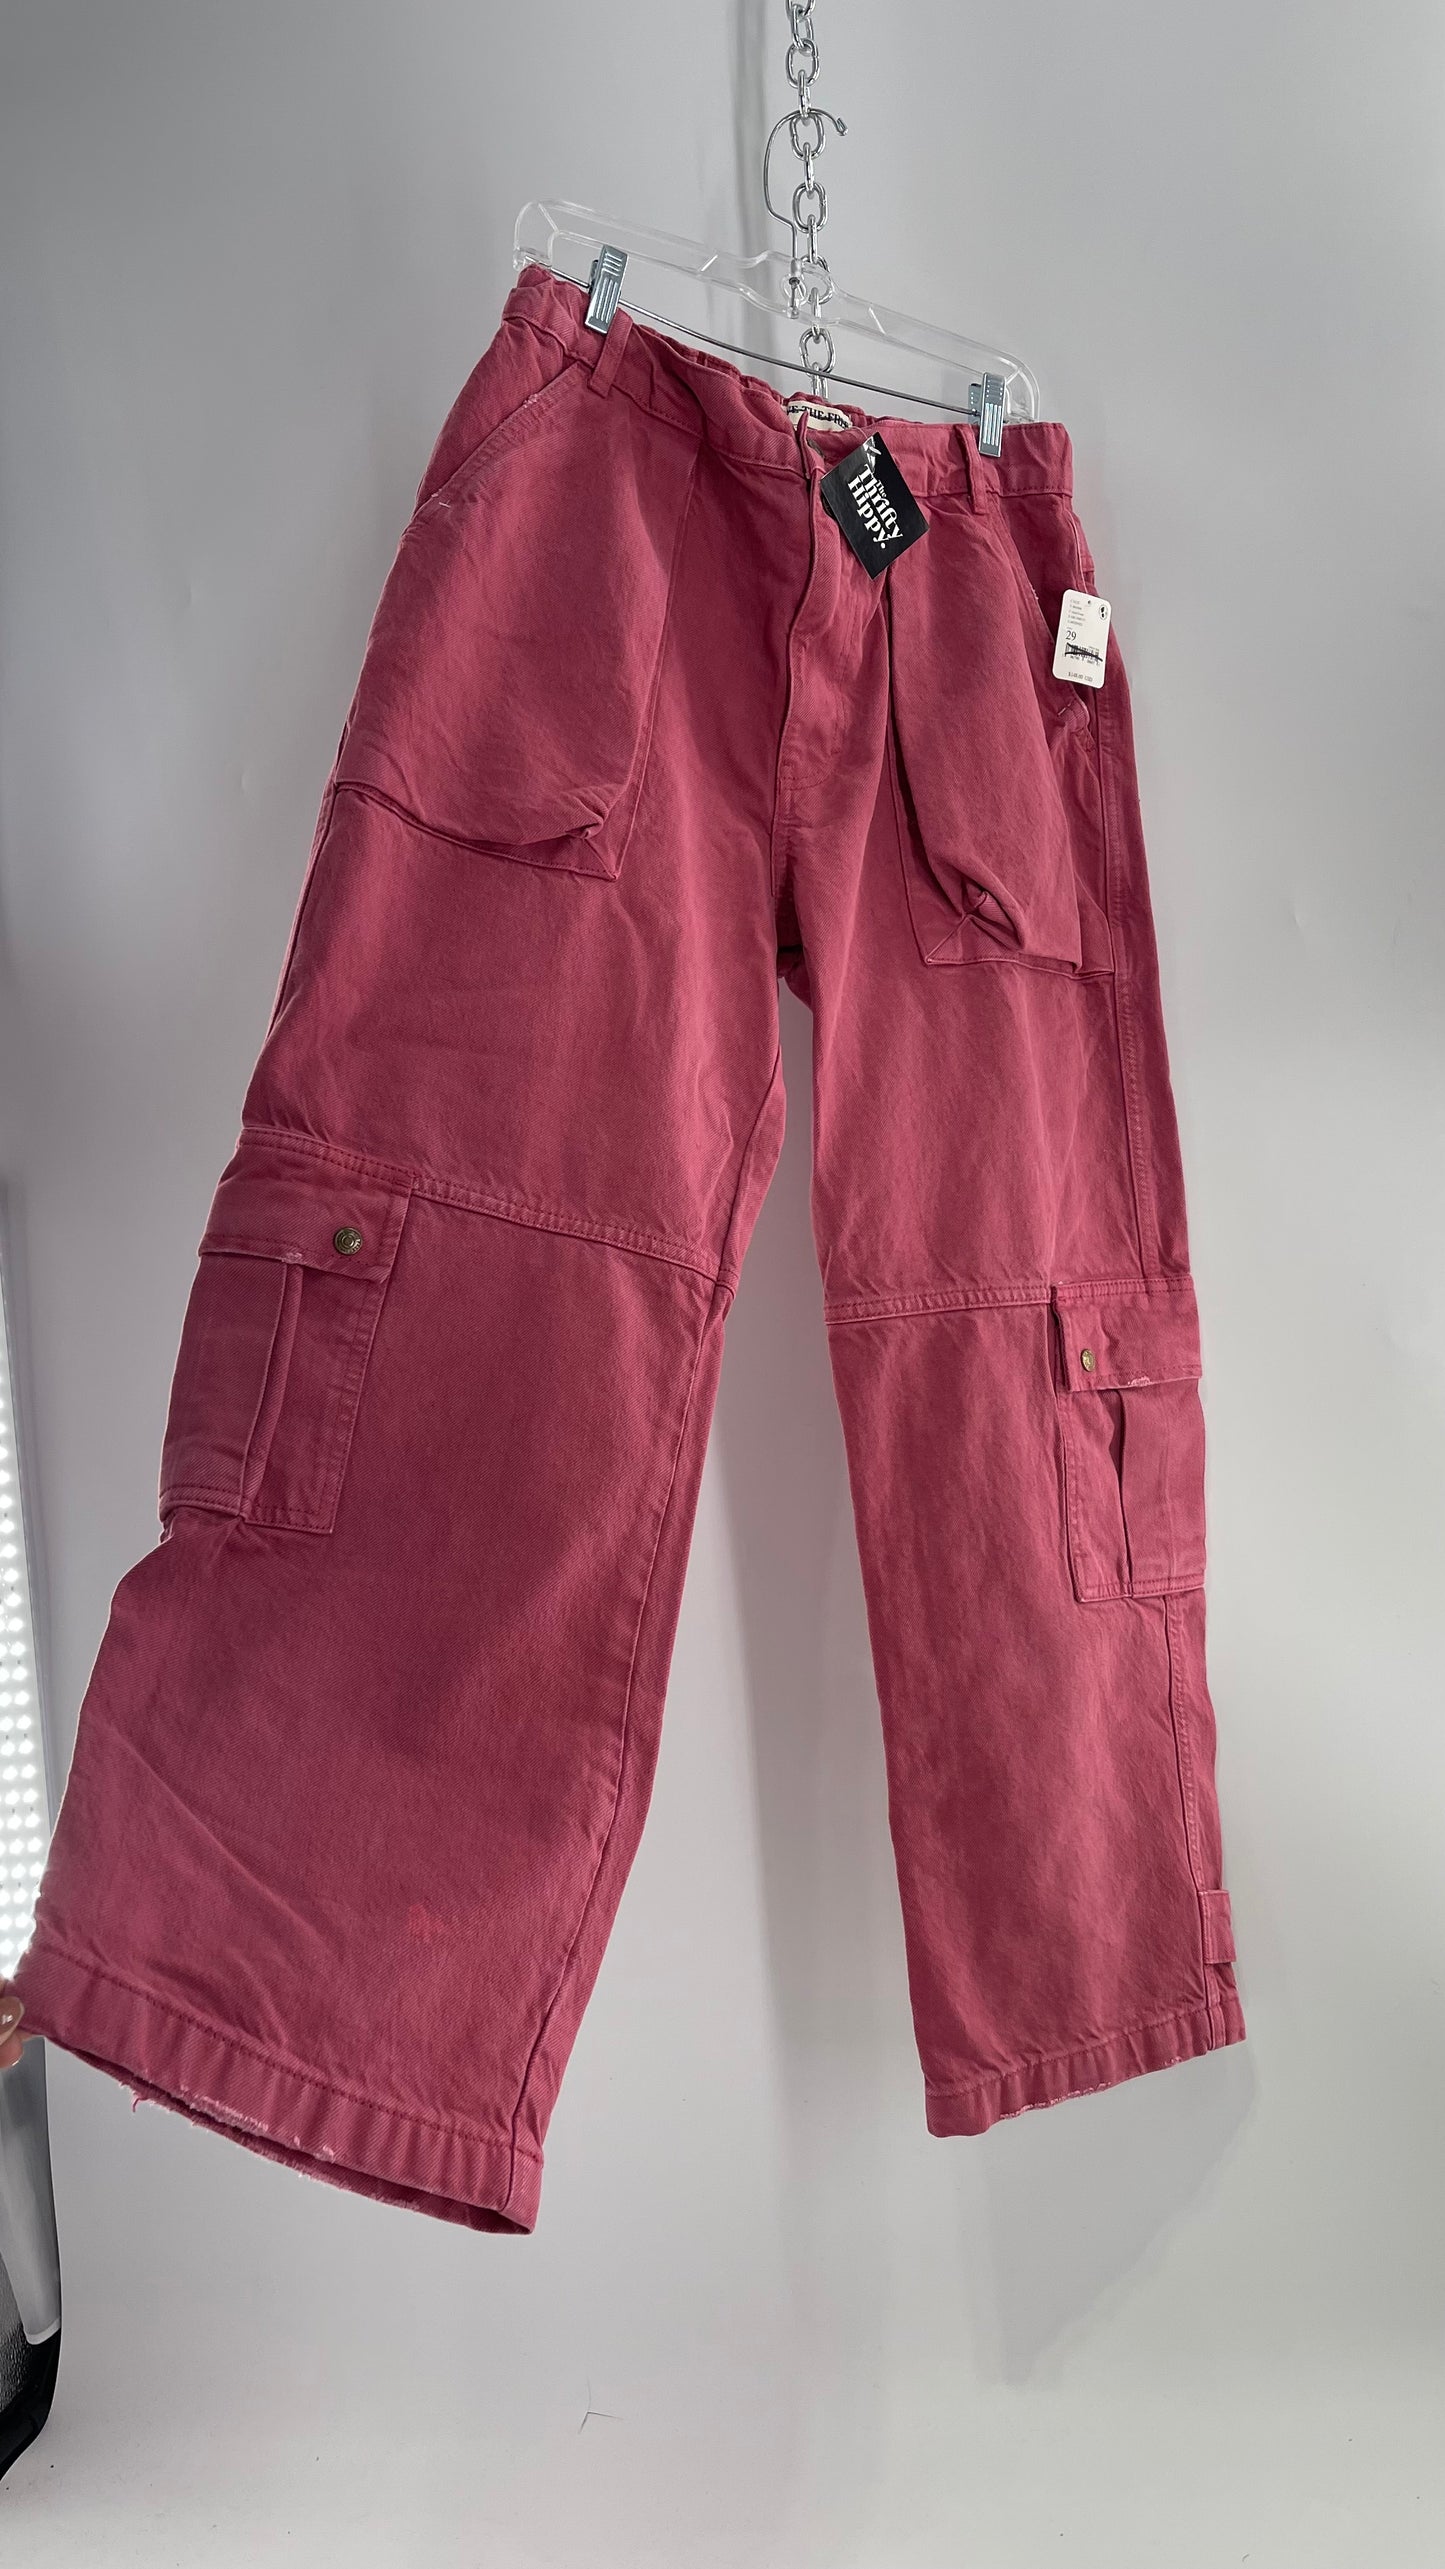 Free People Heavy Duty Mauve Pink Canvas/Carpenter Baggy Cargos with Tags Attached (29)